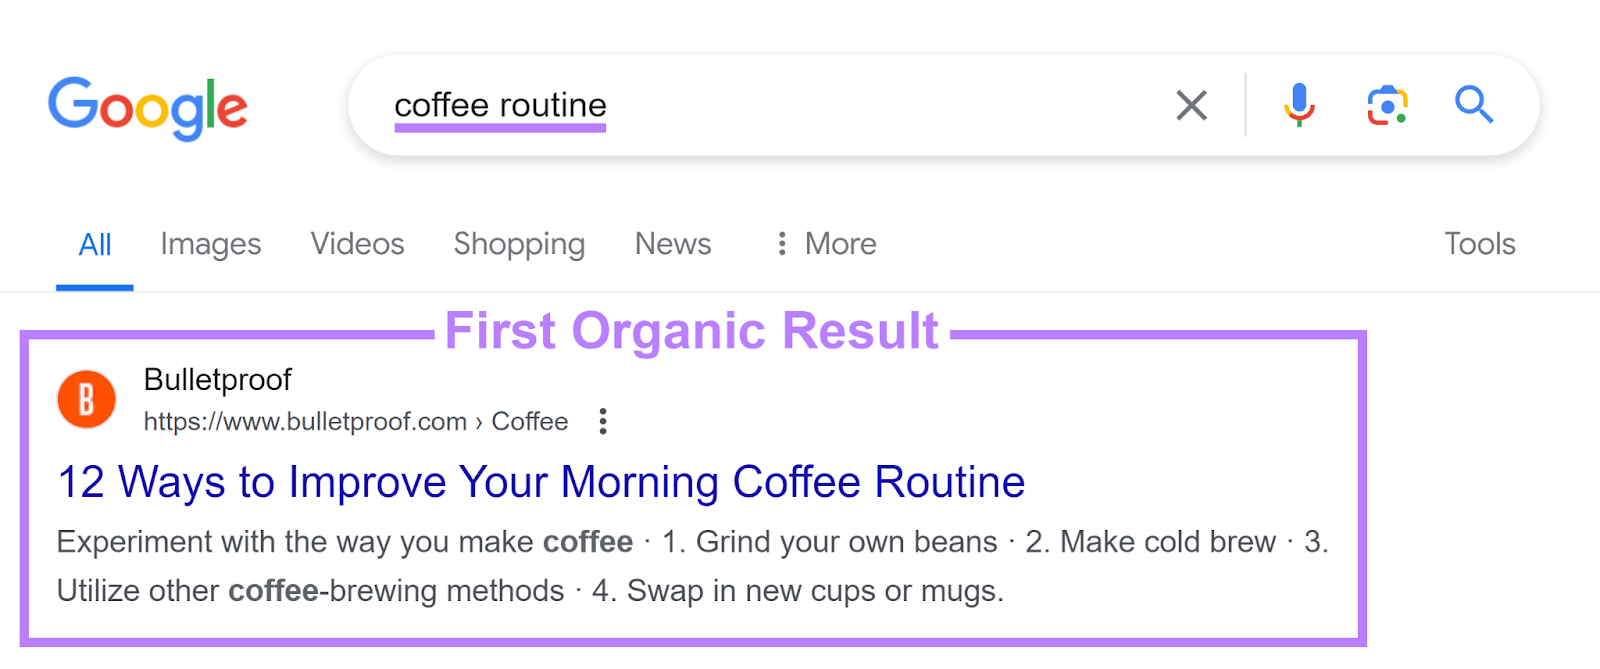 First organic result annotated for 'coffee routine' search on Google.